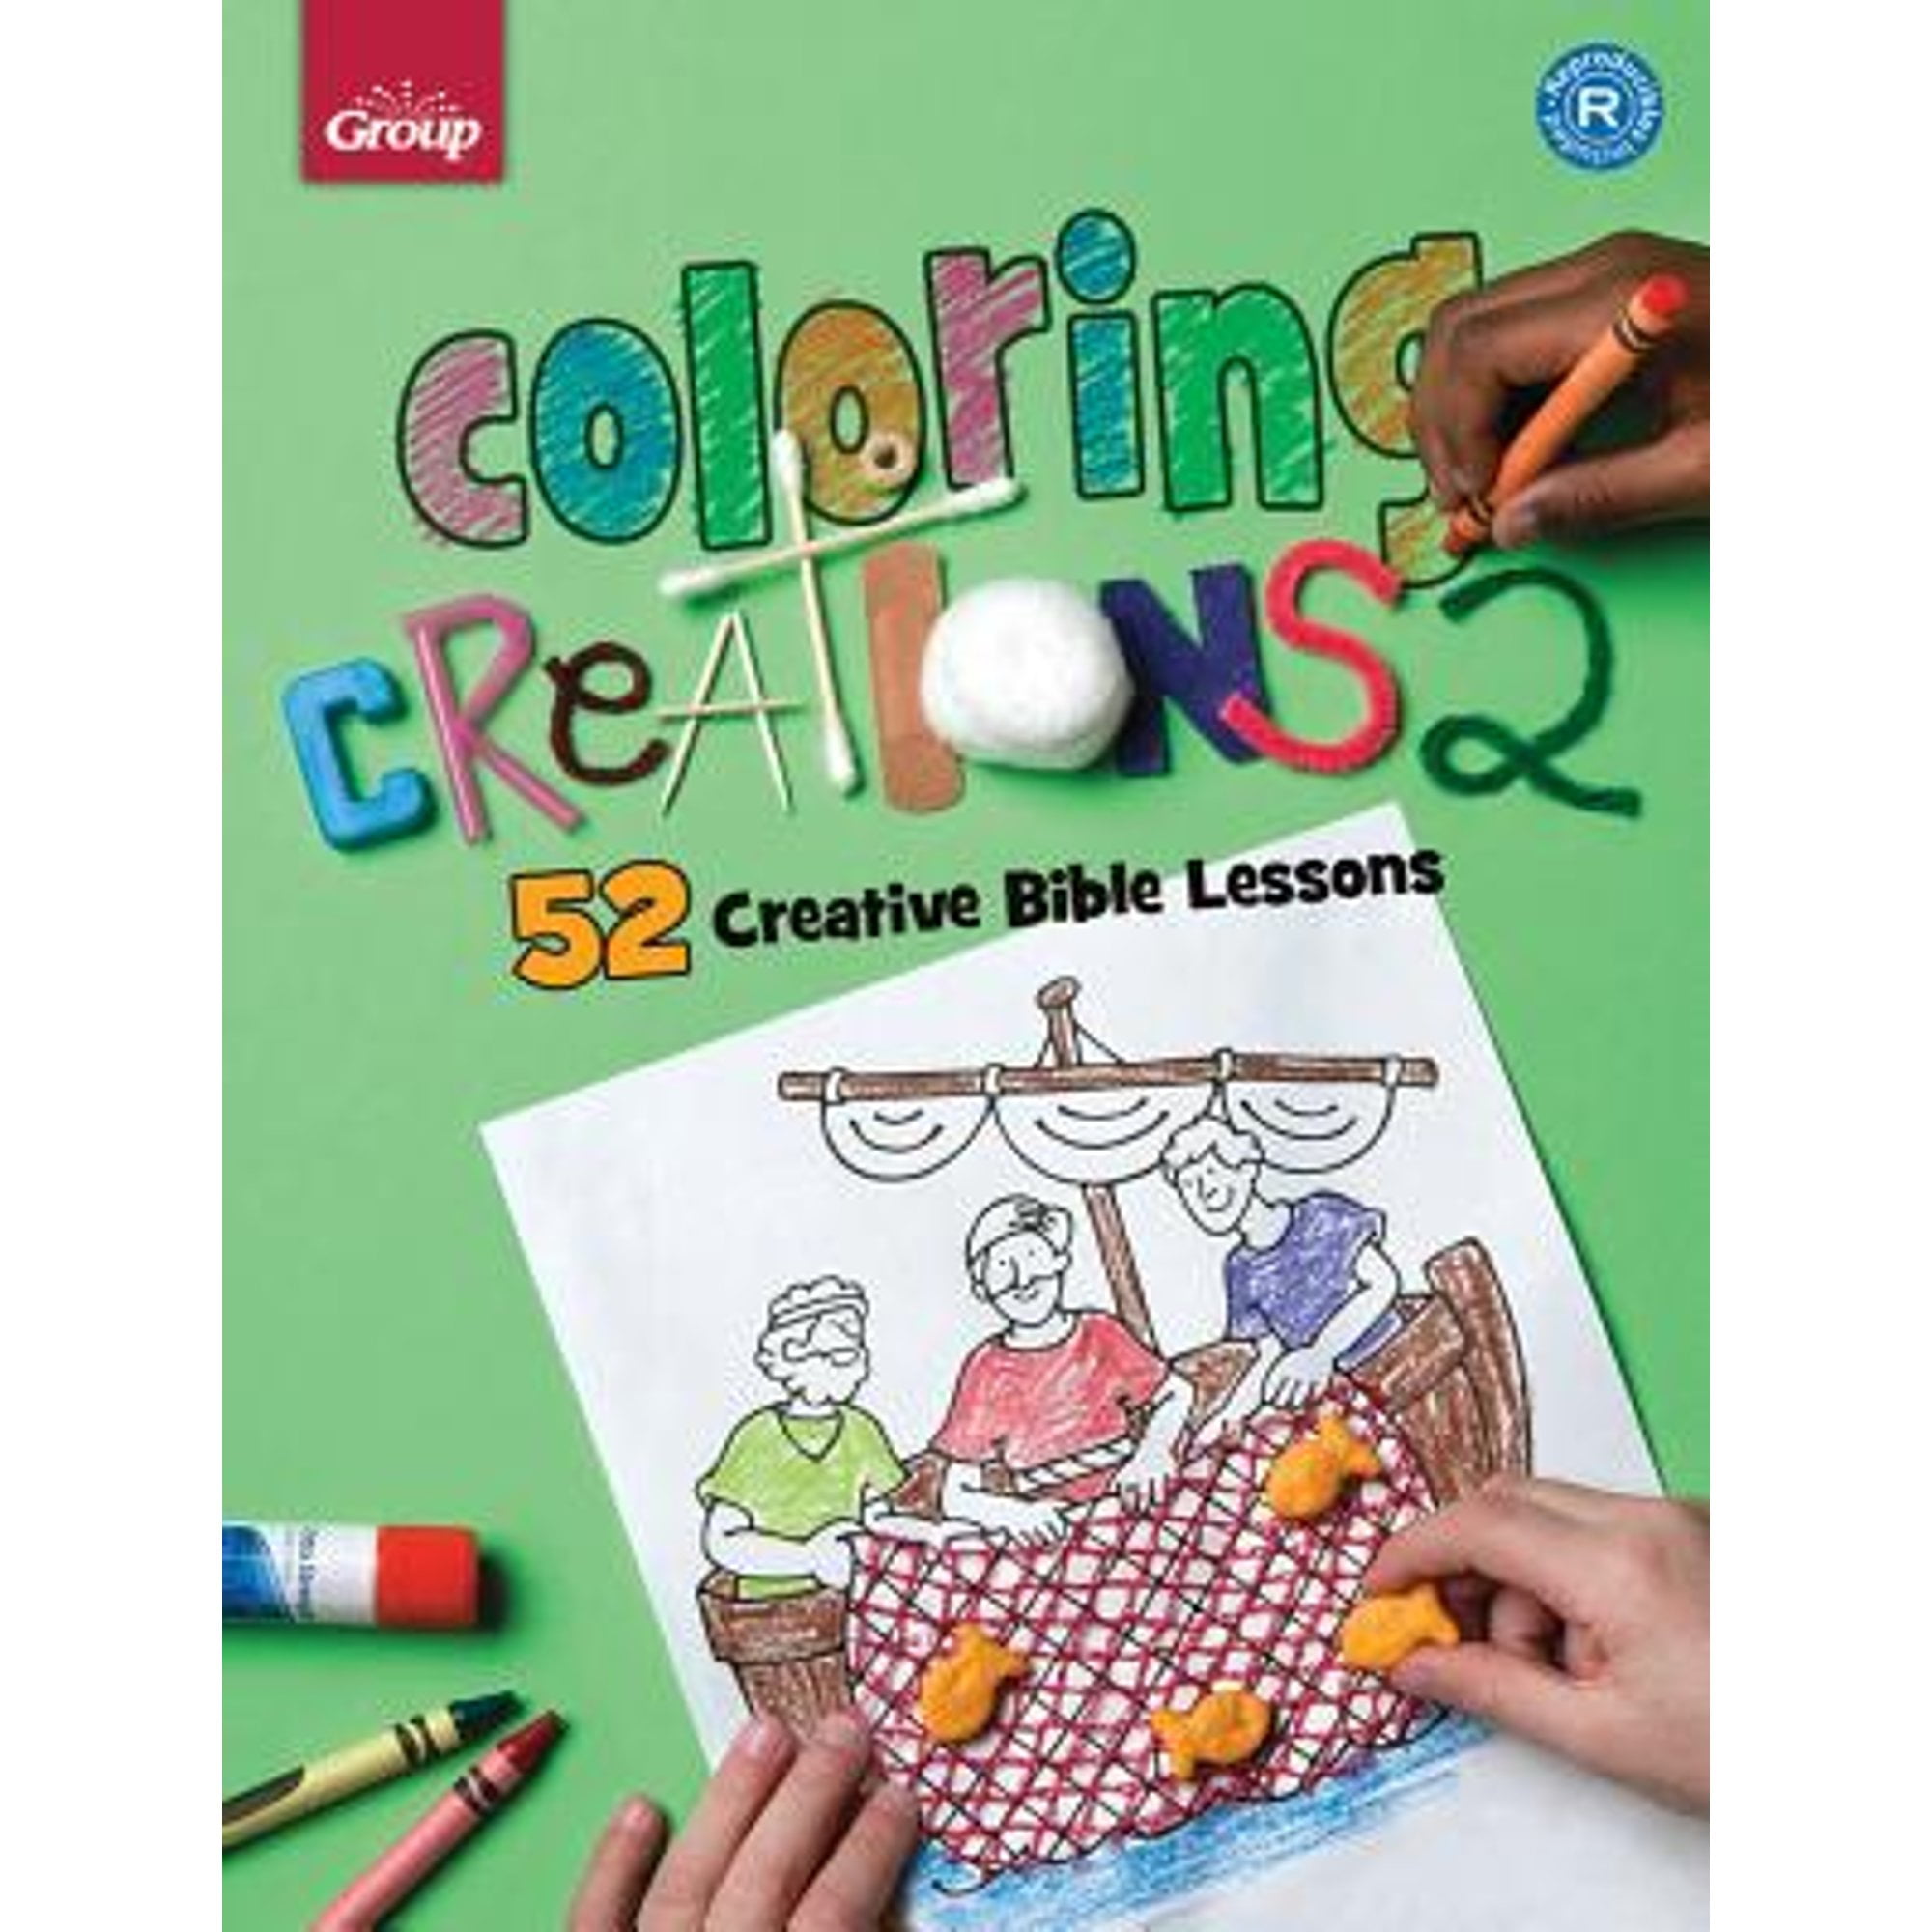 Pre-Owned Coloring Creations 2: 52 Bible Activity Pages (Paperback) by Group Publishing